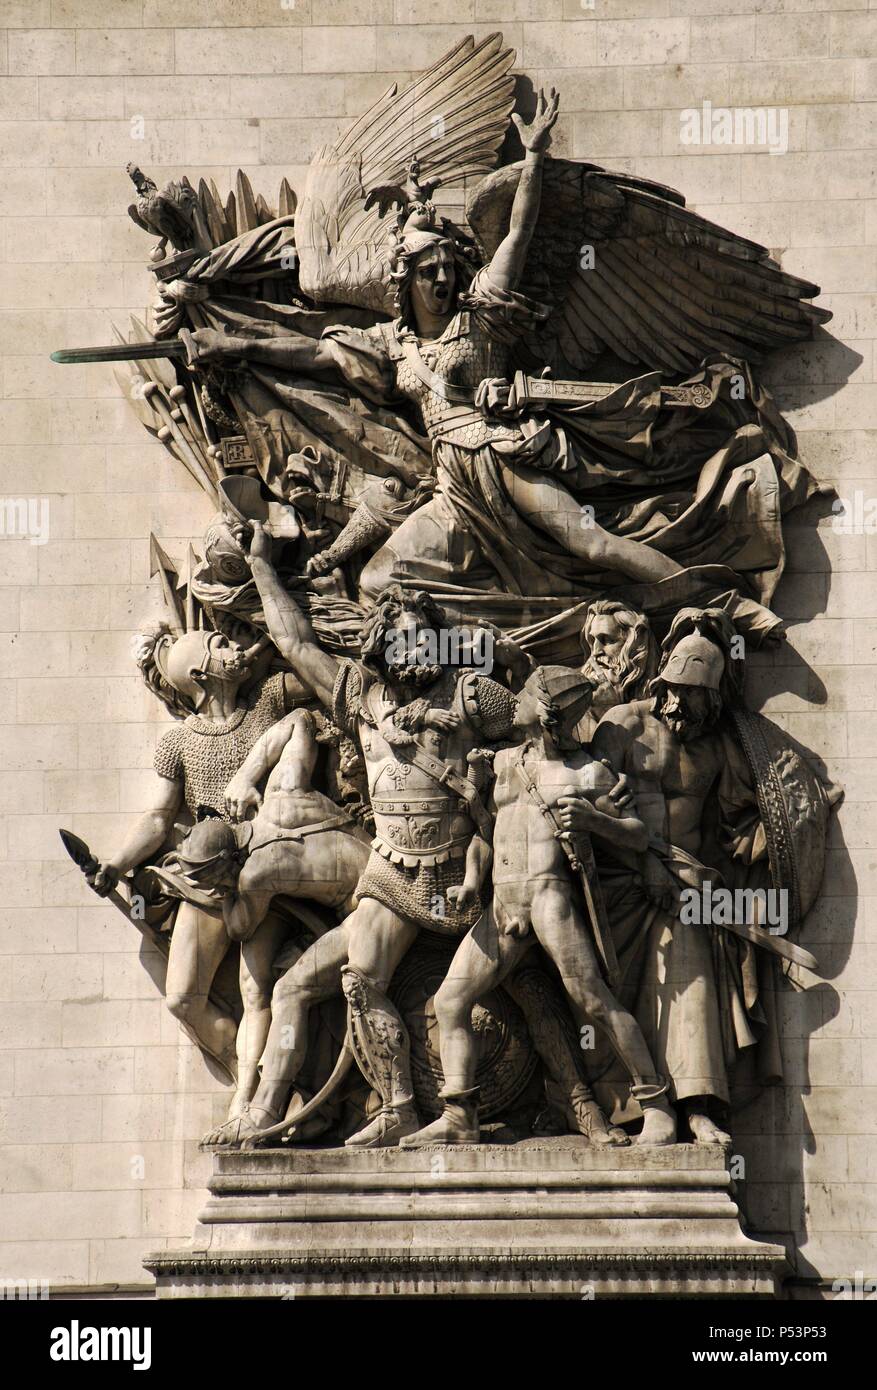 France. Paris. Triumphal Arch. Depart of 1792. La Marseillaise personified on the Arc de Triomphe. by Francois Rude. The sculptural group celebrates the cause of the French First Republic during the 10 August uprising. Above the volunteers is the winged personification of LIberty. Stock Photo